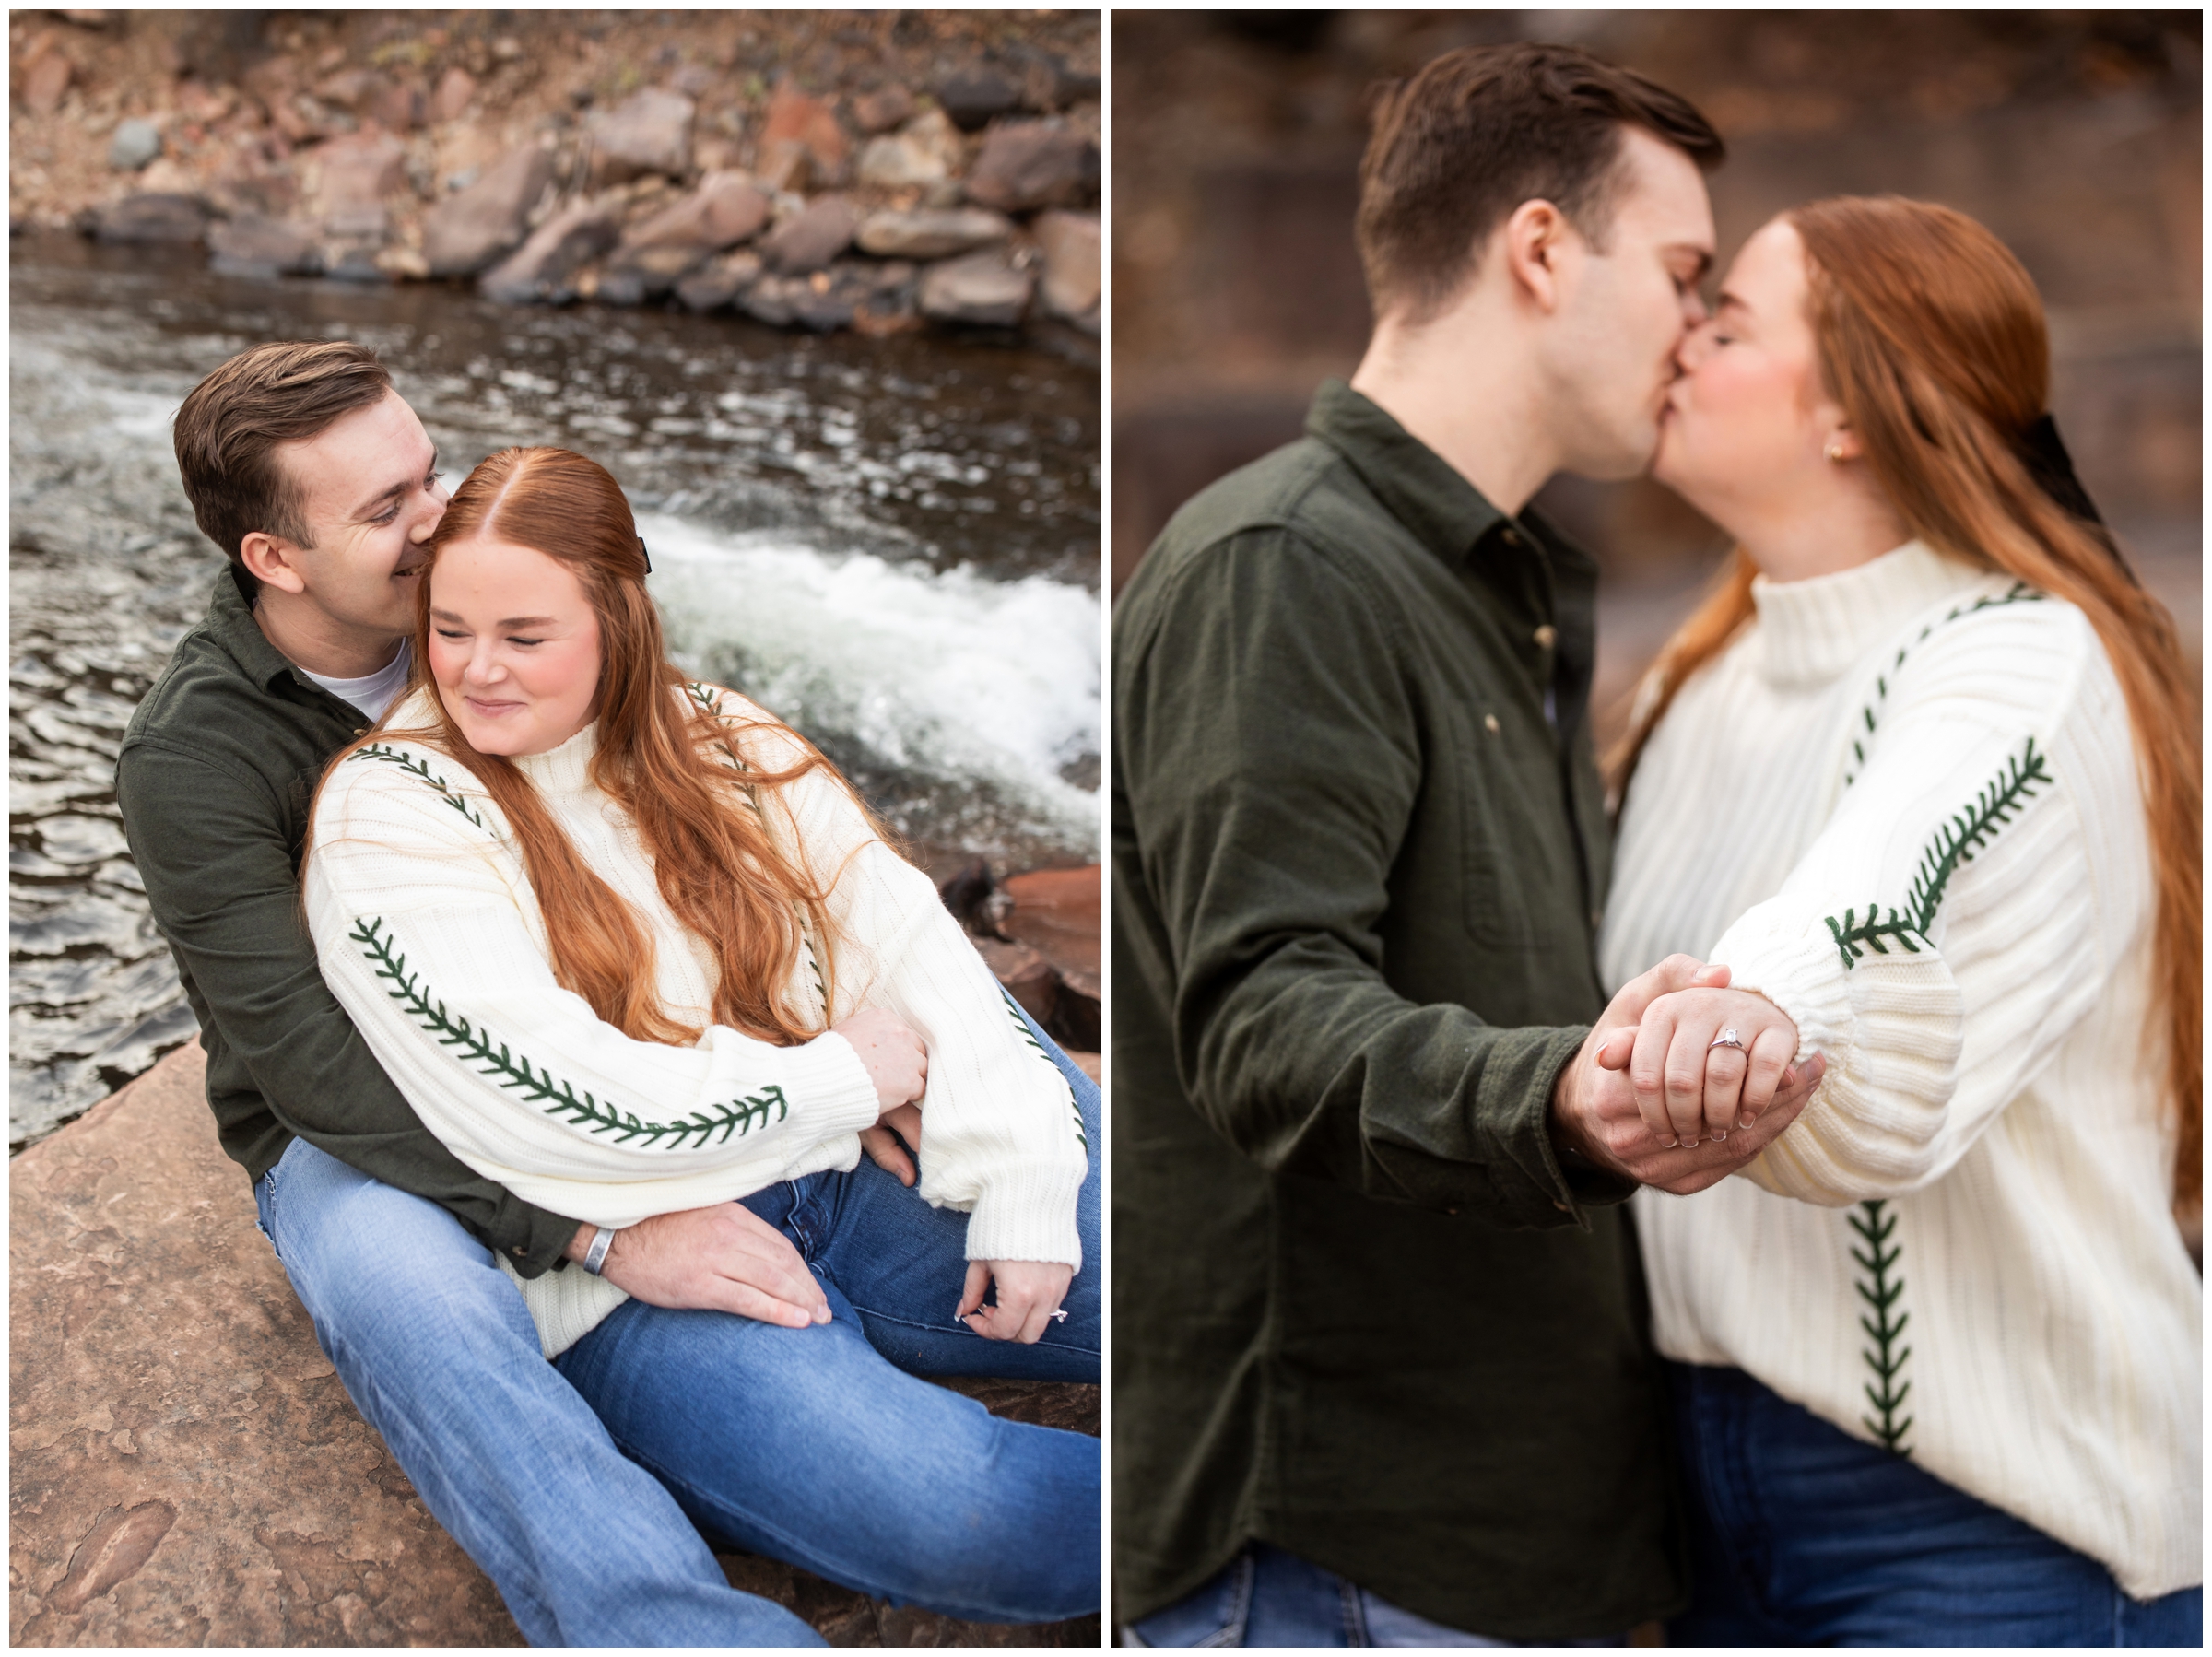 river engagement photos inspiration in Lyons Colorado by Plum Pretty Photography 